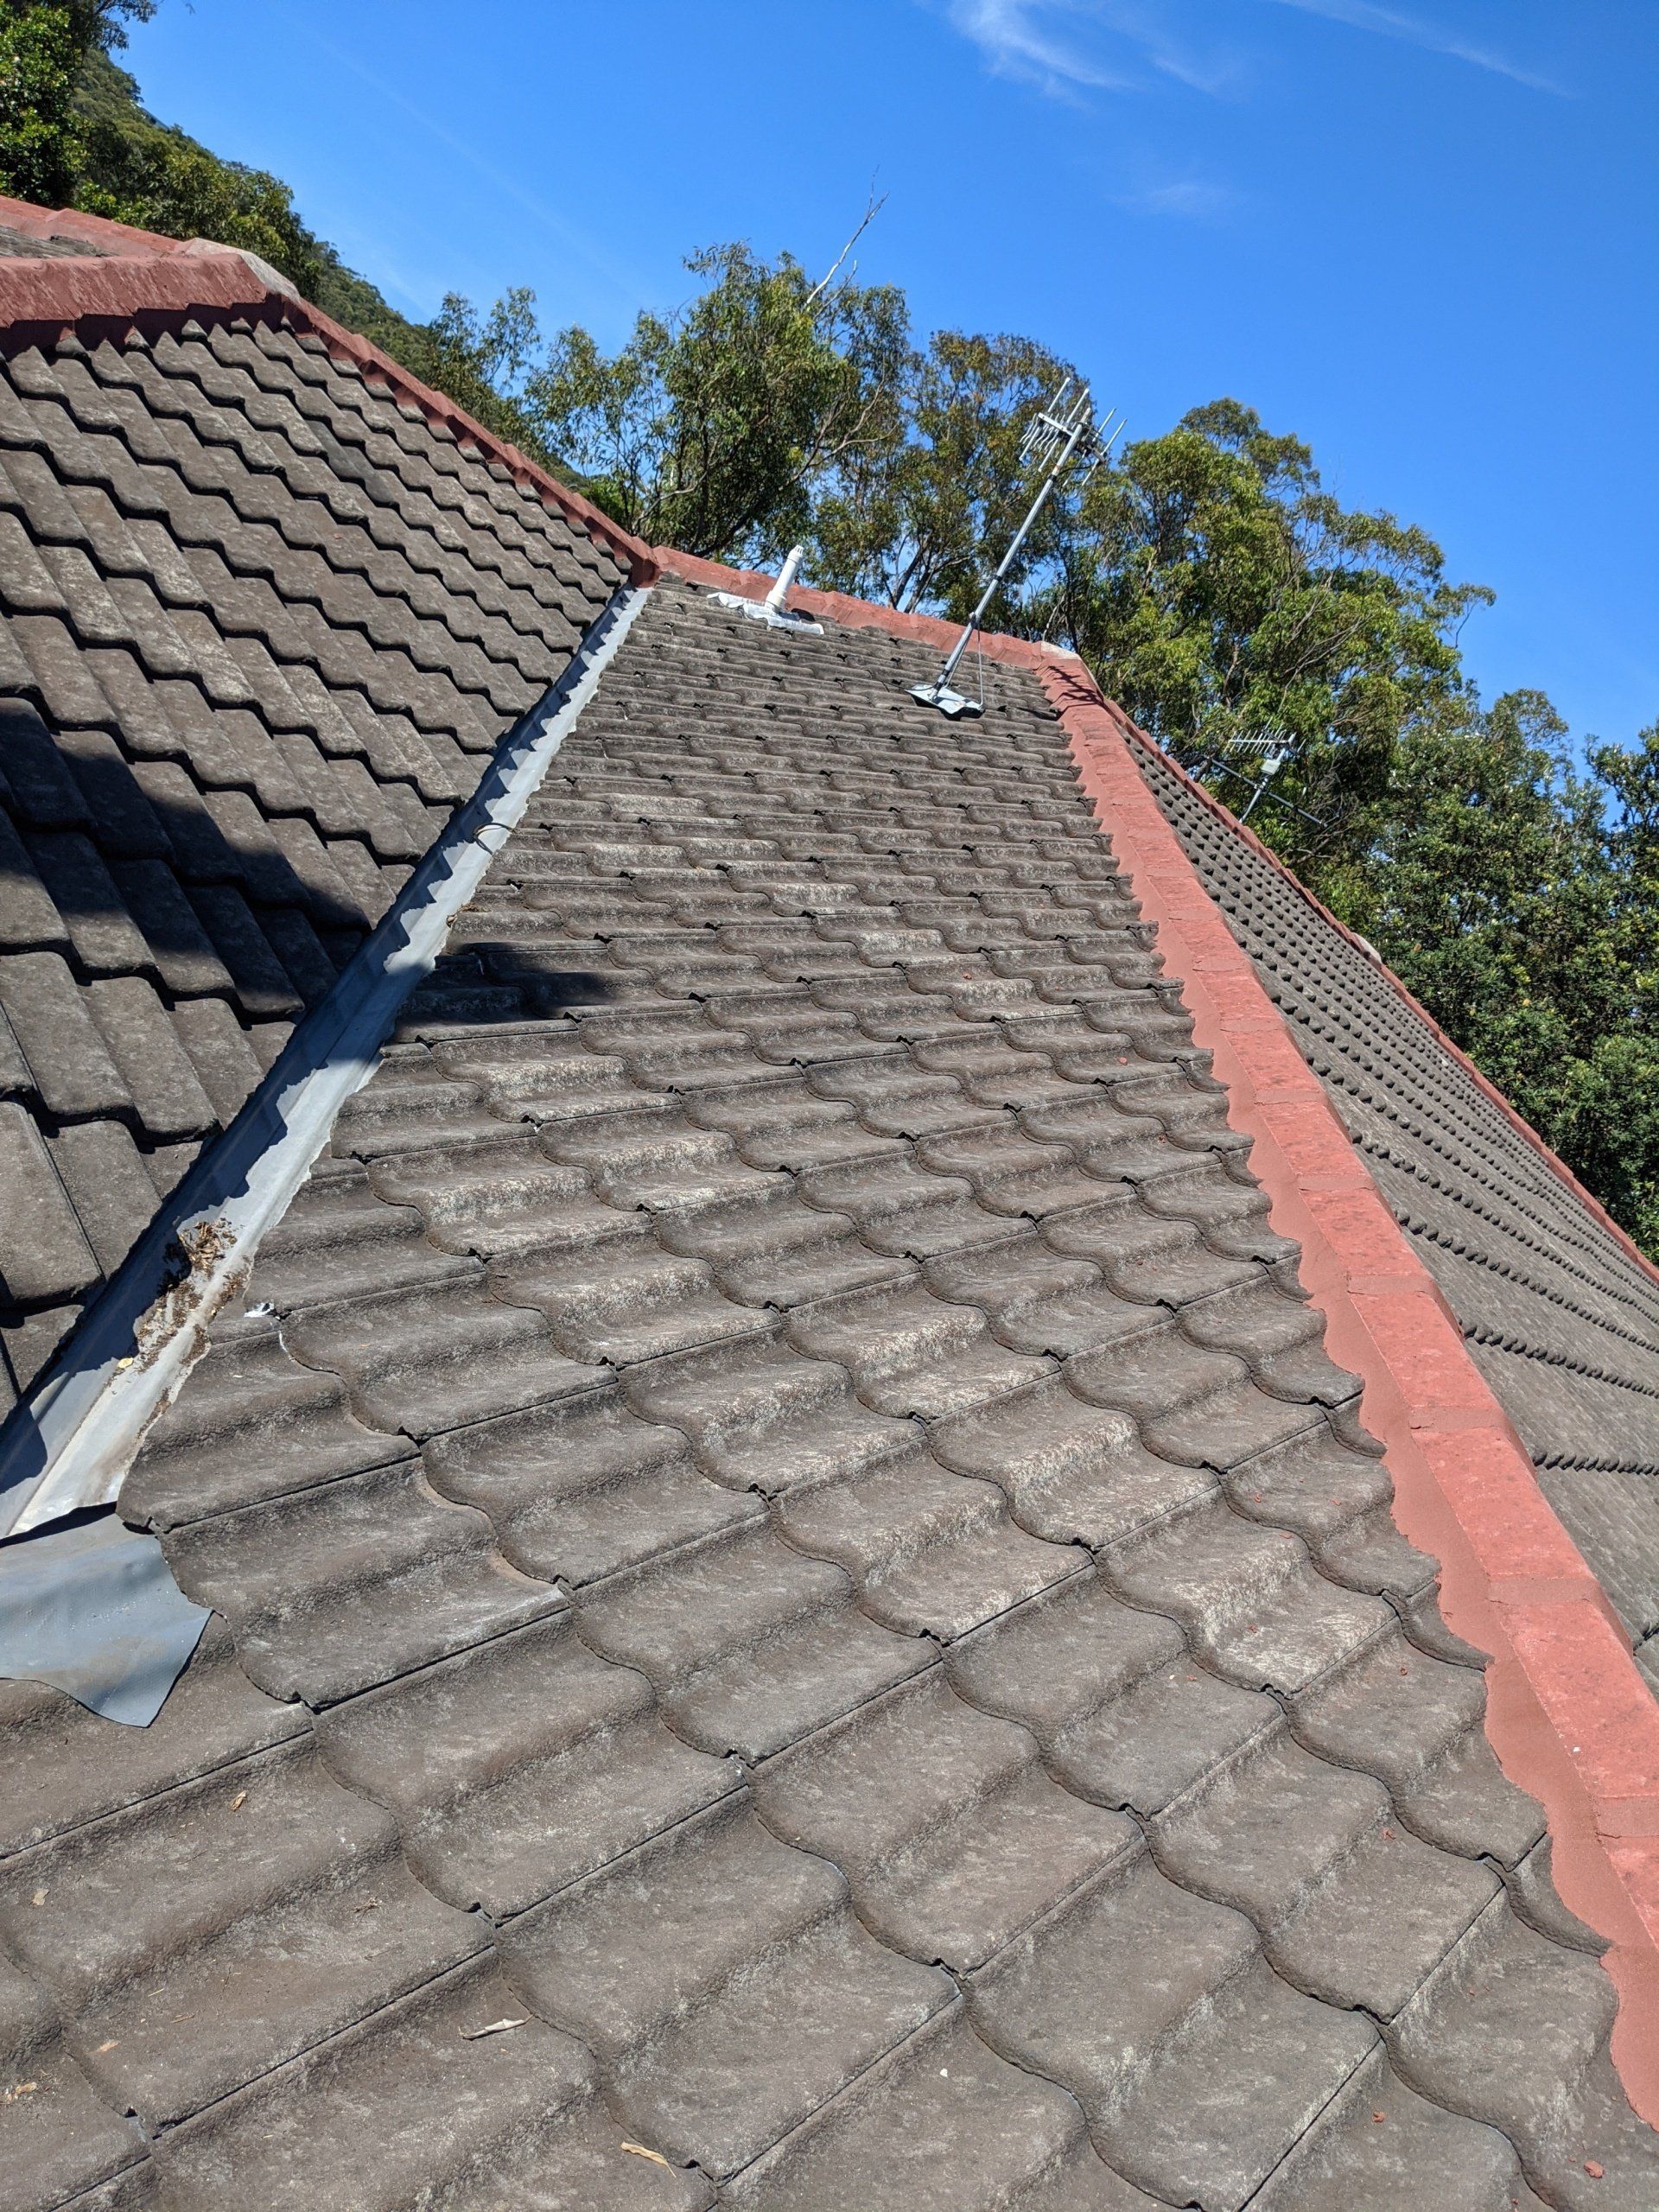 Side View of Red and Black Roof - Roofing Specialist in Port Stephens, NSW